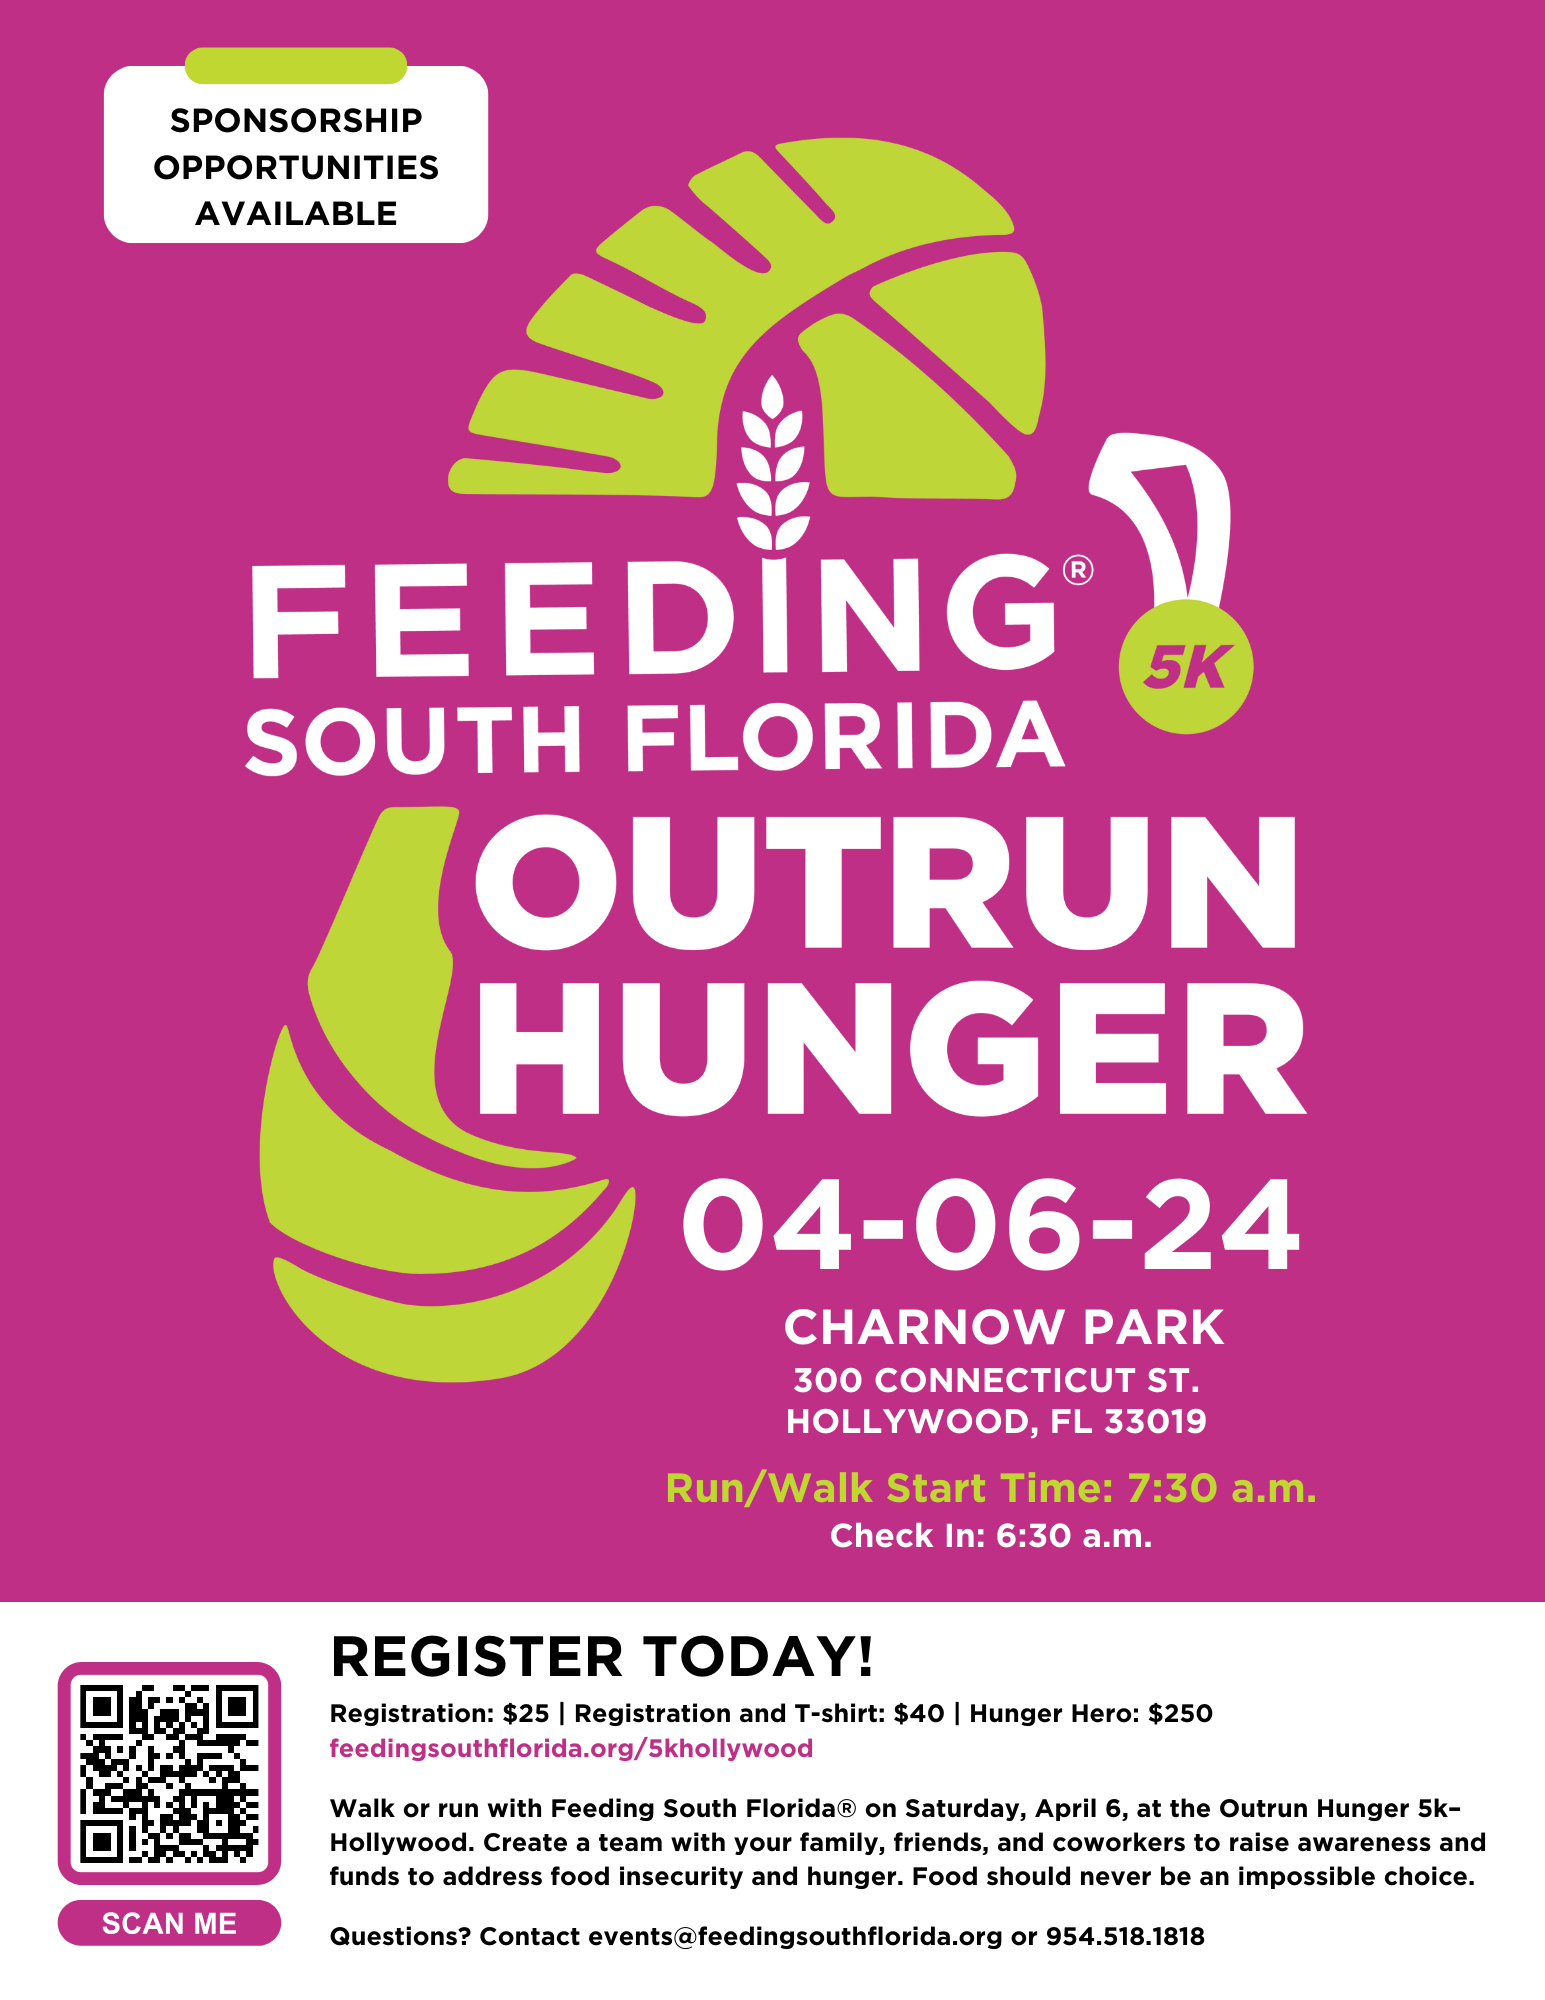 Flyer for event 'Outrun Hunger' on 4-06-24 at Charnow Park.